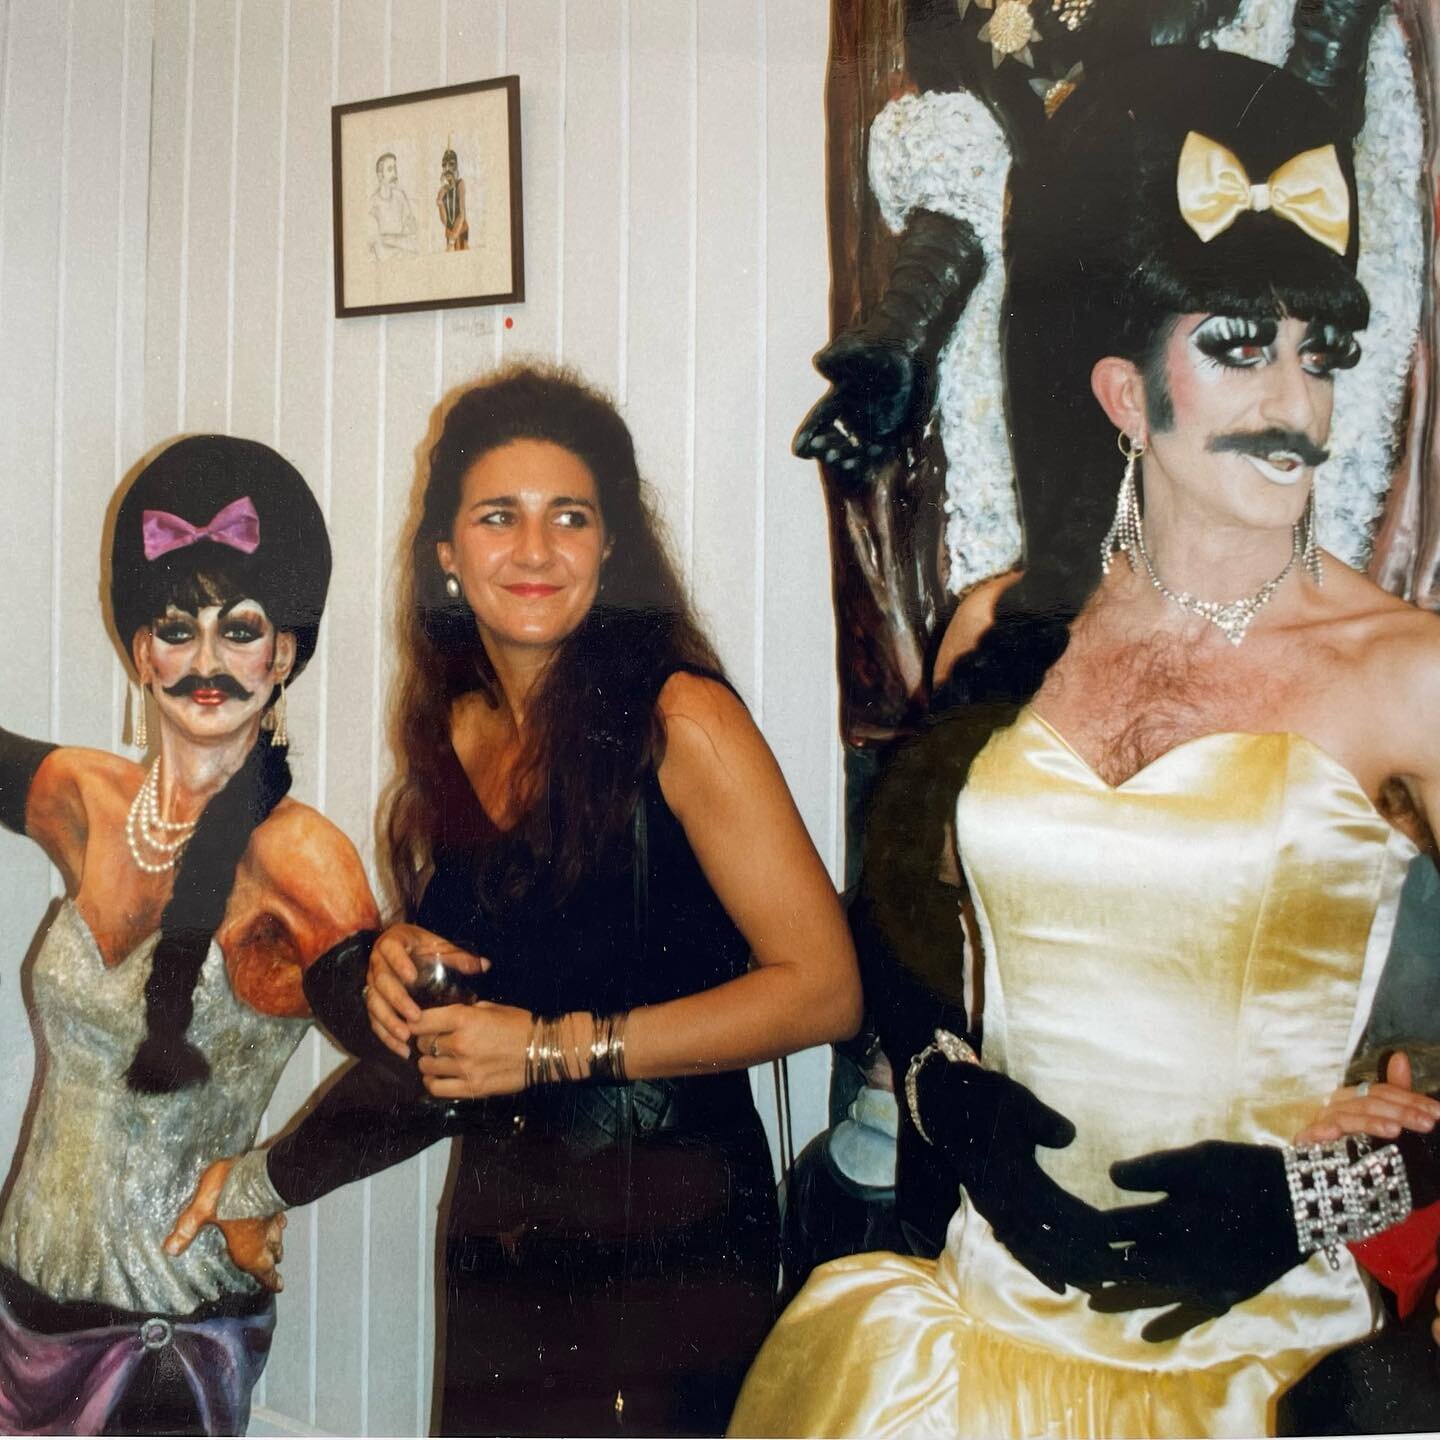 Look what I finally found sorting through old photos. Rarely do I post photos of myself, but this was another era, my East End London days, youth on my side! I used to hang out with Penny/ Robert who introduced me to the world of drag in the 1980&rsq